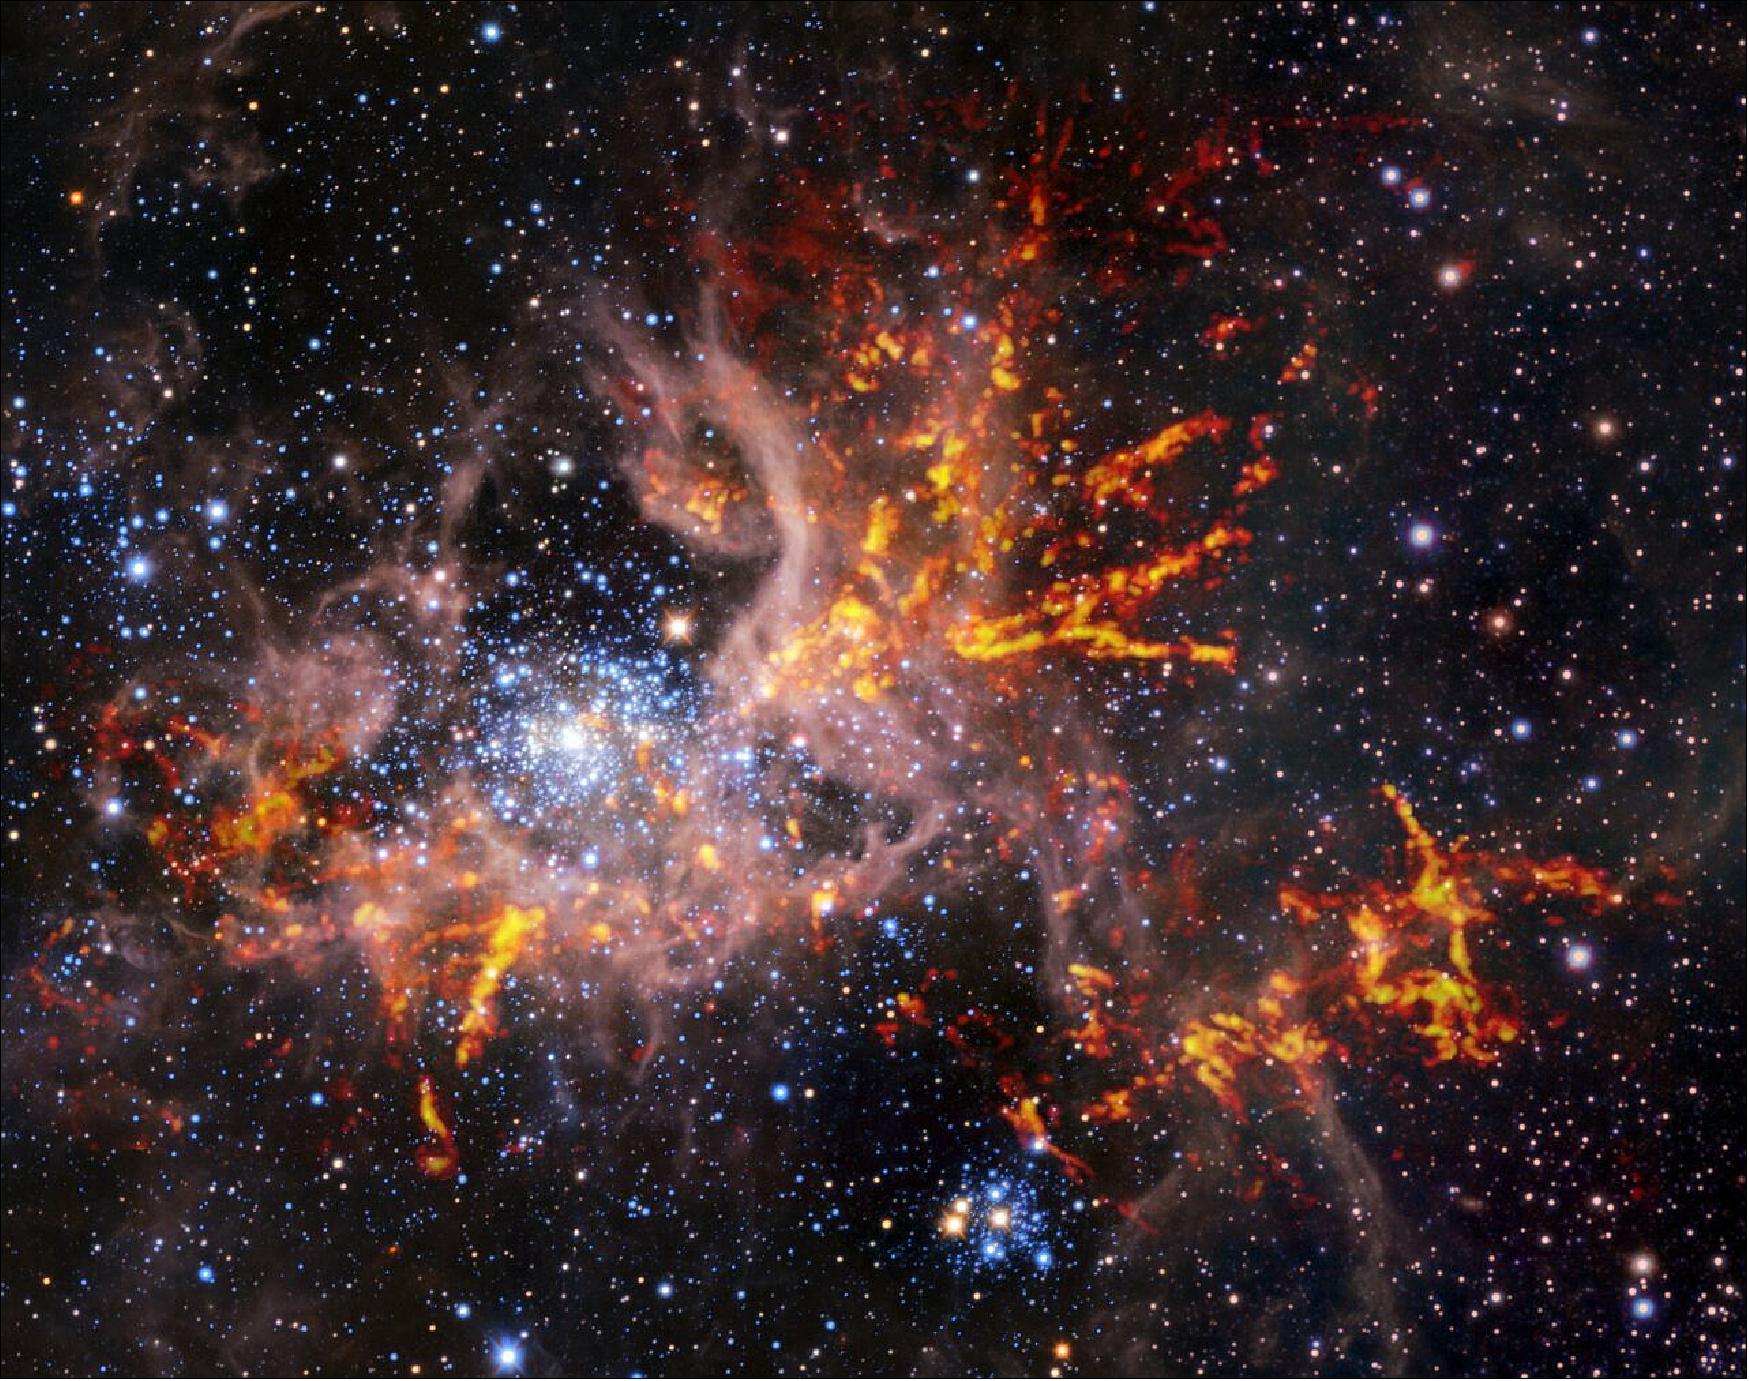 Figure 19: This composite image shows the star-forming region 30 Doradus, also known as the Tarantula Nebula. The background image, taken in the infrared, is itself a composite: it was captured by the HAWK-I instrument on ESO’s Very Large Telescope (VLT) and the Visible and Infrared Survey Telescope for Astronomy (VISTA), shows bright stars and light, pinkish clouds of hot gas. The bright red-yellow streaks that have been superimposed on the image come from radio observations taken by the Atacama Large Millimeter/submillimeter Array (ALMA), revealing regions of cold, dense gas which have the potential to collapse and form stars. The unique web-like structure of the gas clouds led astronomers to the nebula’s spidery nickname (image credit: ESO, ALMA (ESO/NAOJ/NRAO)/Wong et al., ESO/M.-R. Cioni/VISTA Magellanic Cloud survey. Acknowledgment: Cambridge Astronomical Survey Unit)